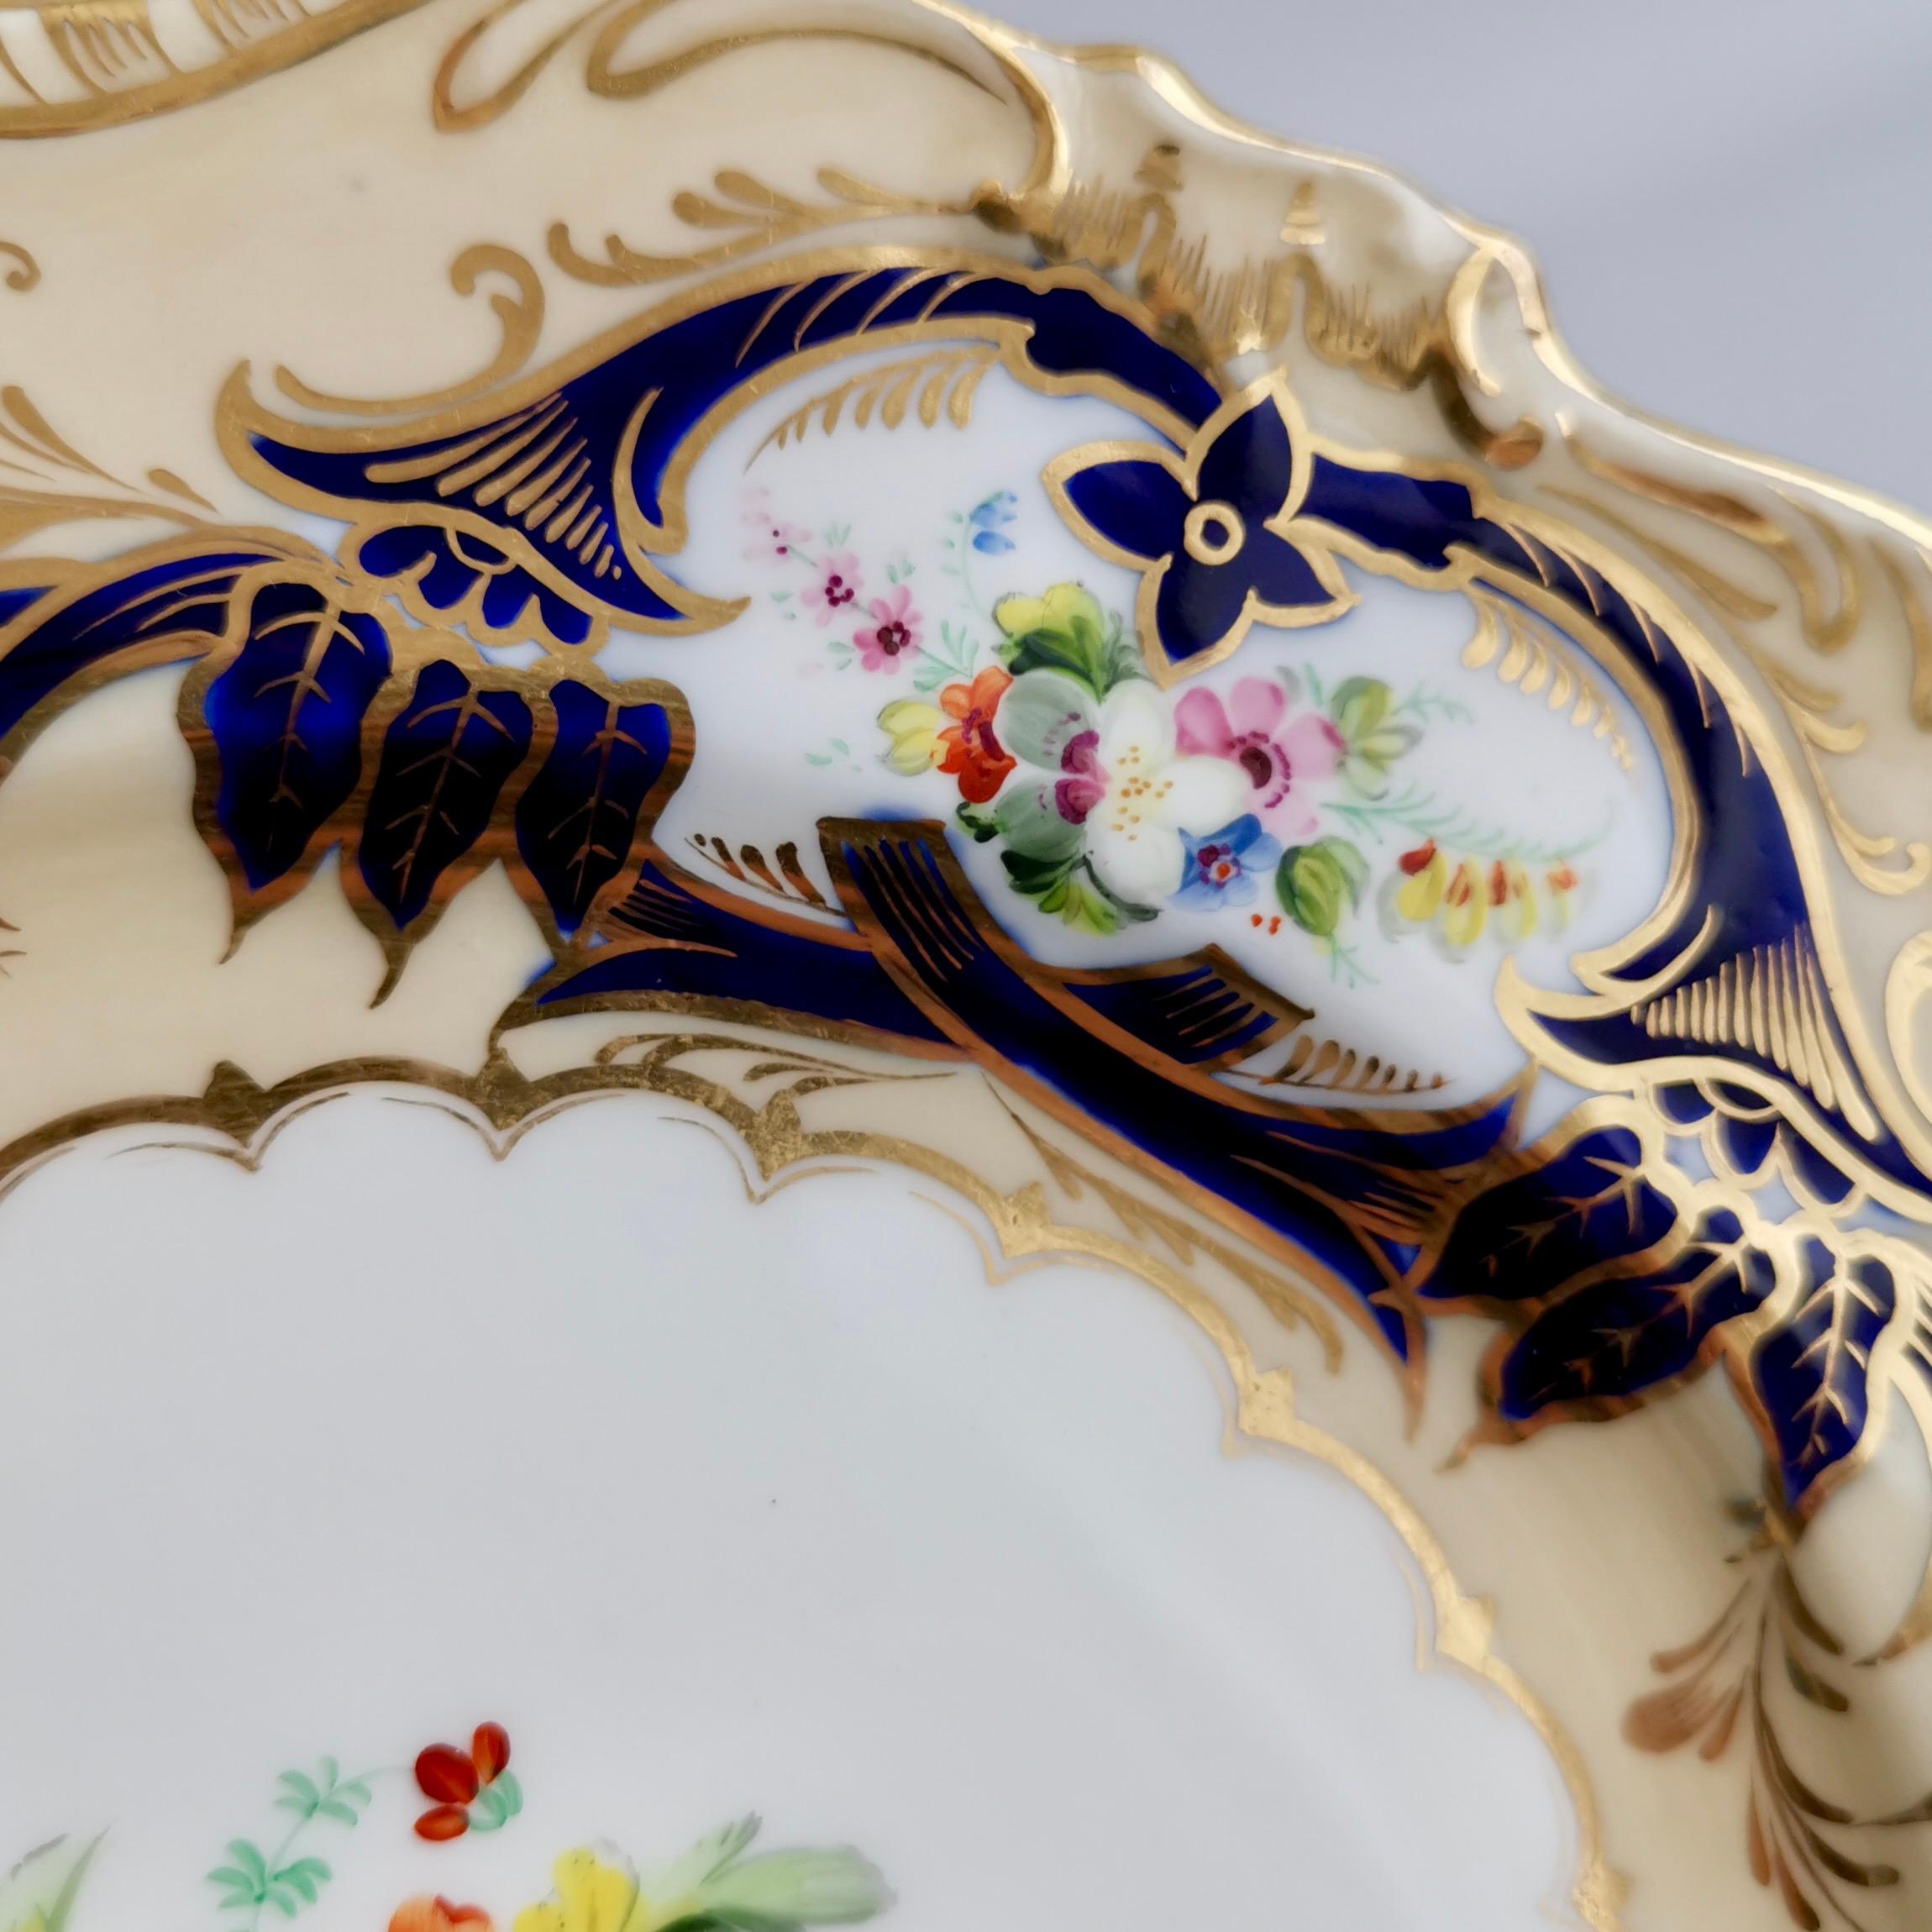 Mid-19th Century Coalport John Rose & Co Coalbrookdale Plate, Rlowers by Brindley, ca 1841